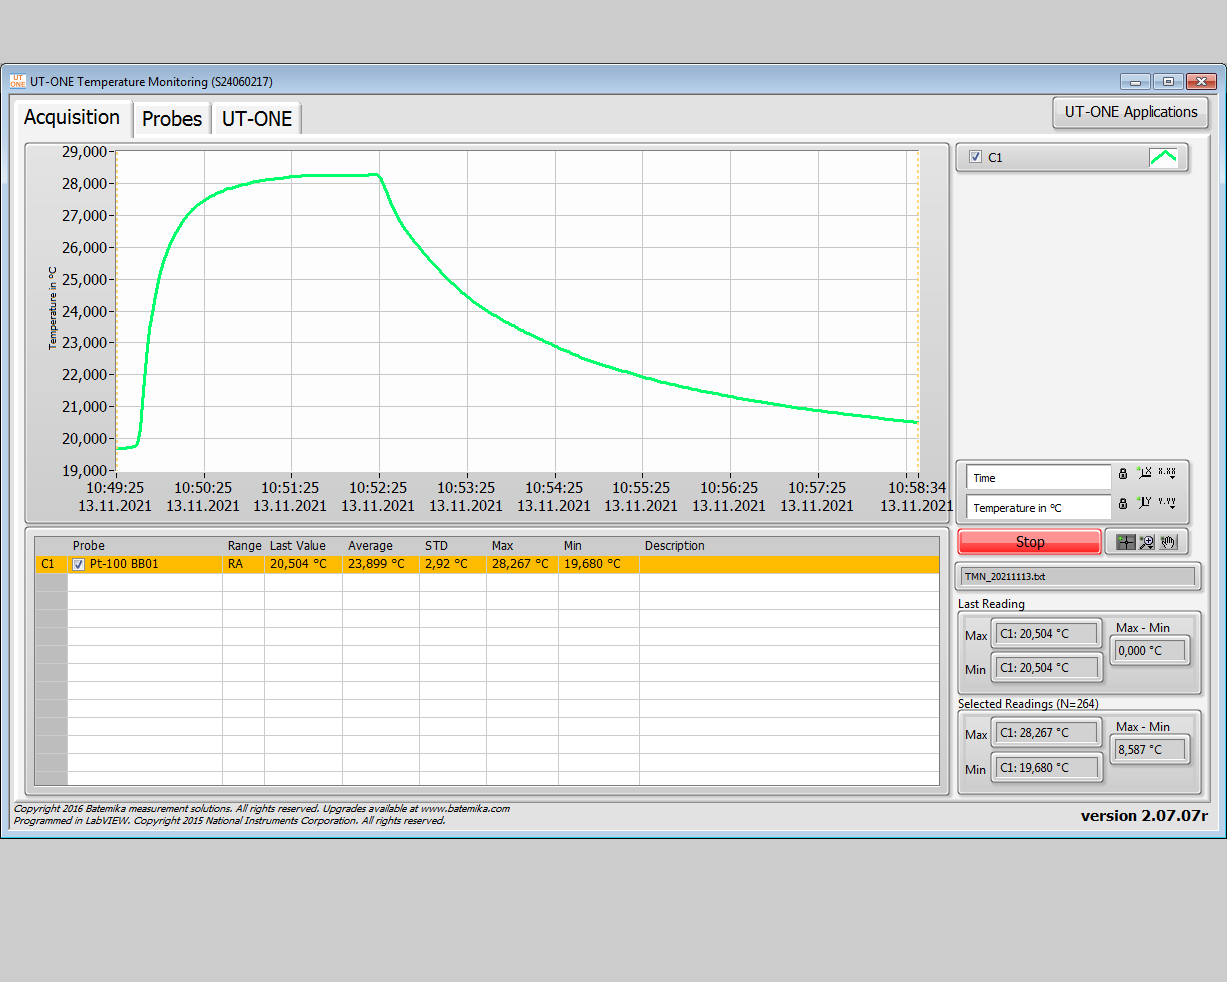 UT-ONE Temperature Monitoring - Graphical and Numerical (Max, Min, Average, STD, (Max-Min)) presentation of measured data